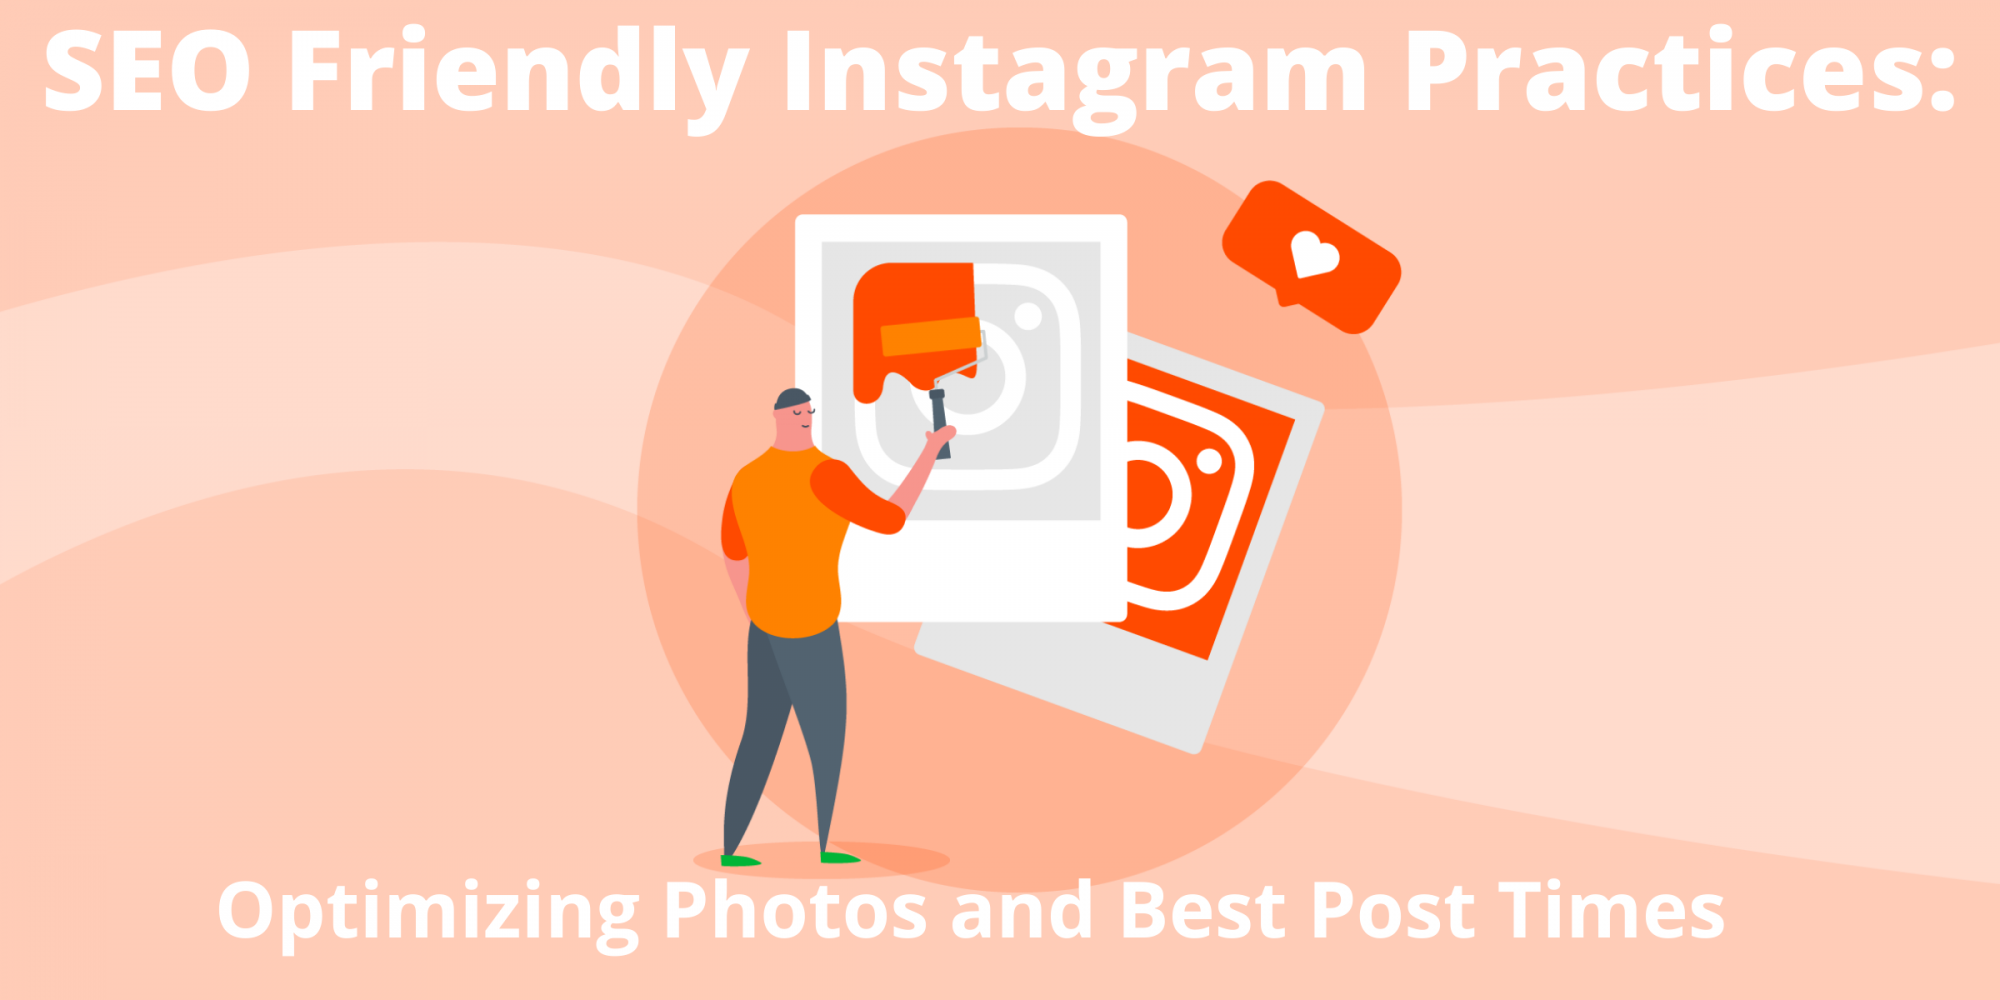 SEO Friendly Instagram Practices: Optimizing Photos and Best Post Times